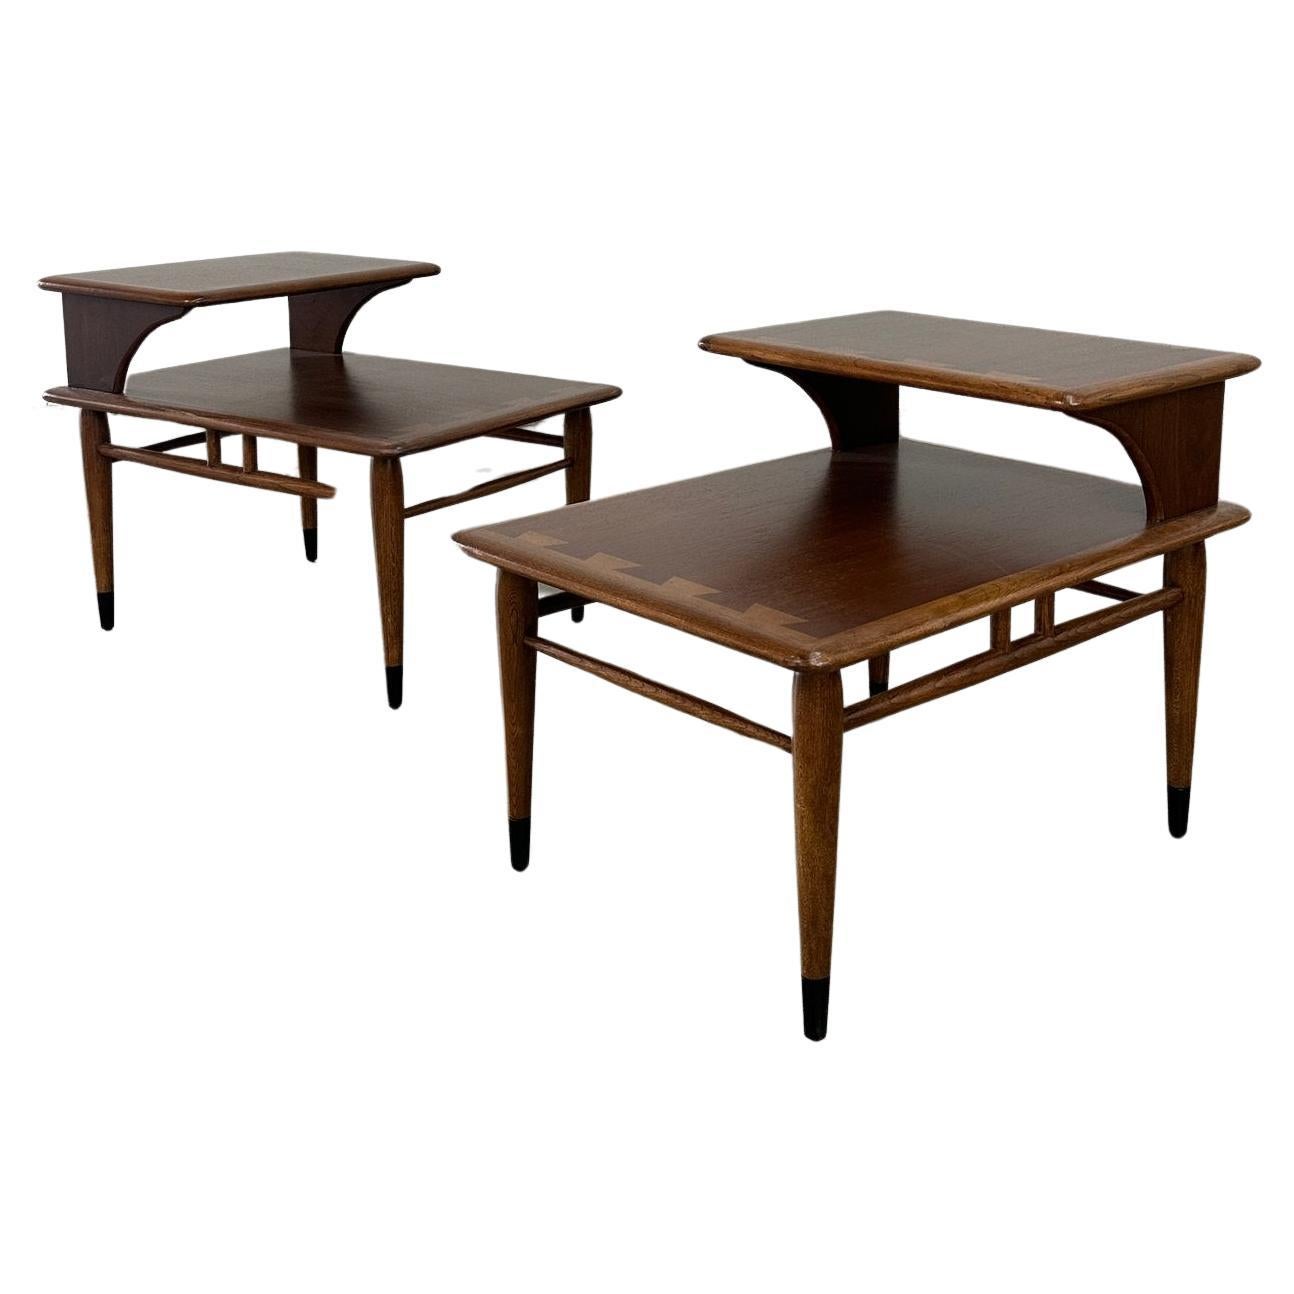 Two tier side tables by Lane Acclaim- pair